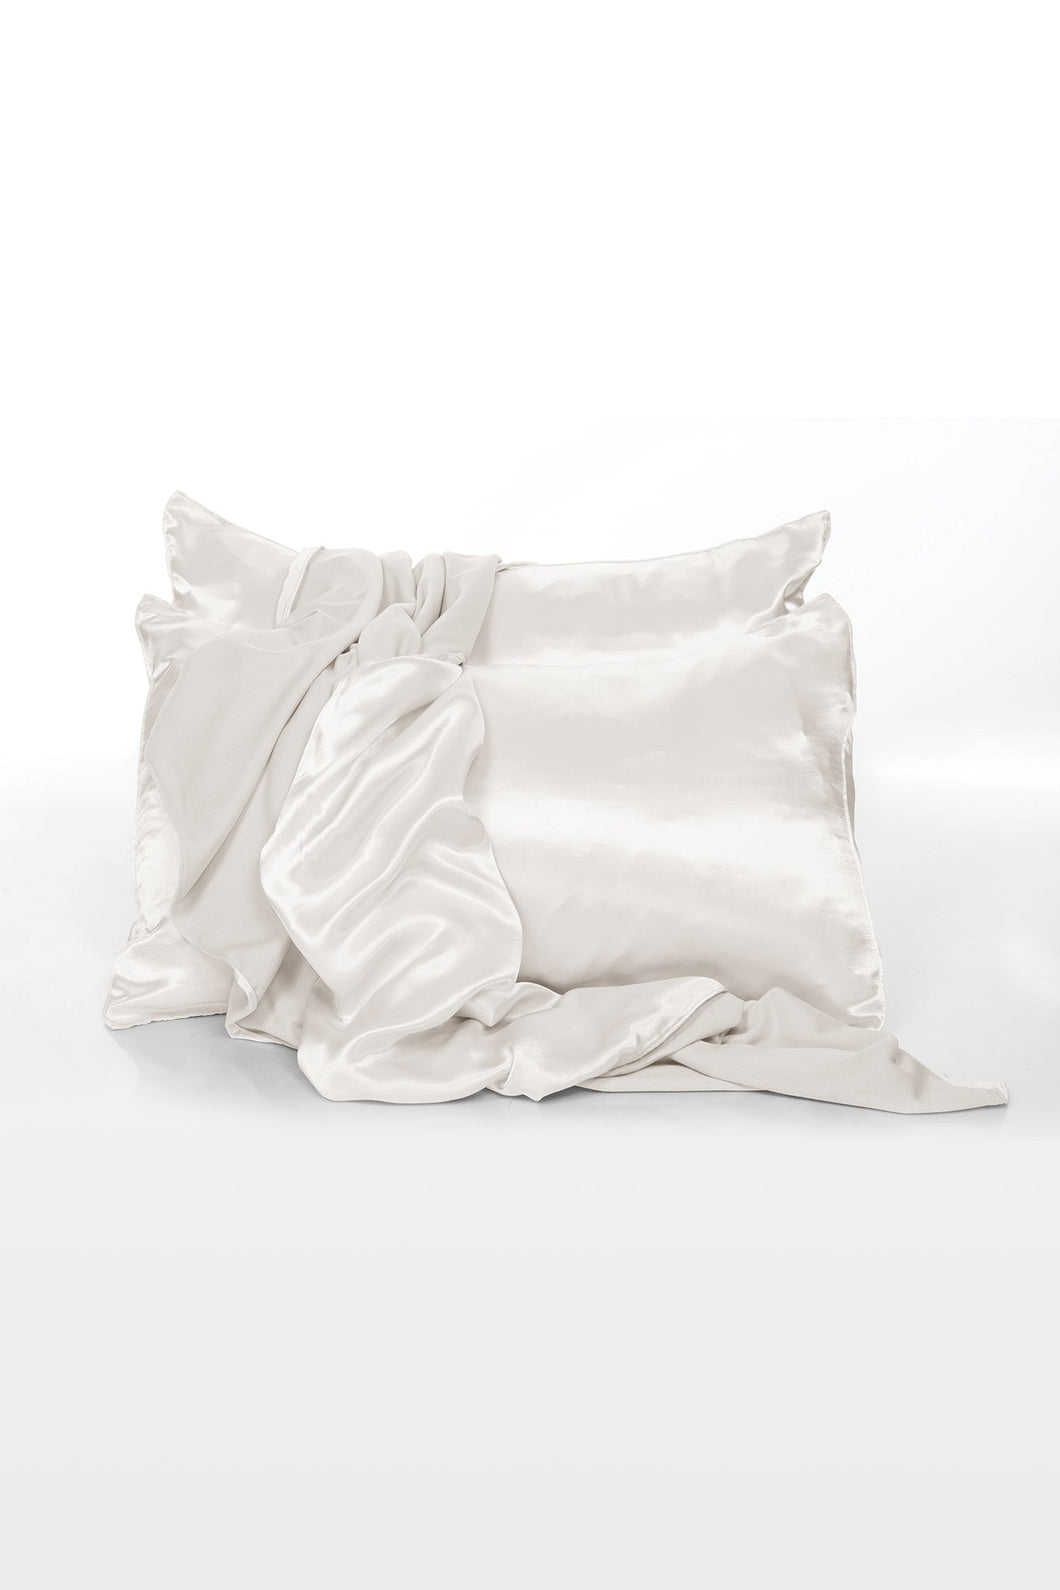 Pearl Satin Pillowcases Set Of Two - Standard Size